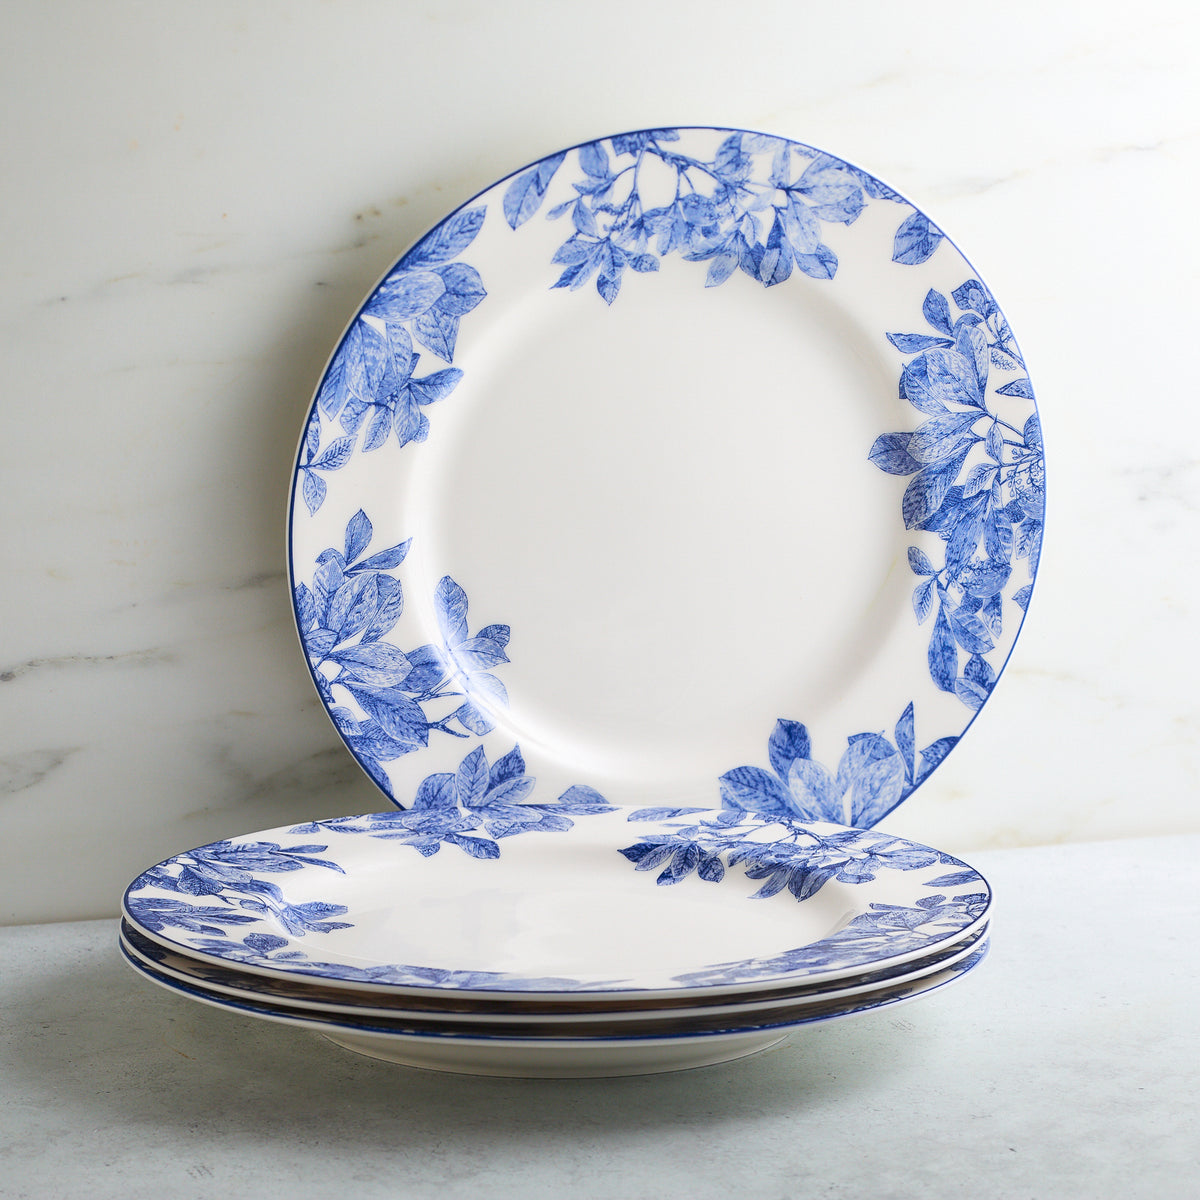 A stack of Arbor Rimmed Dinner Plates by Caskata Artisanal Home, featuring white porcelain plates with delicate botanical details in blue on the rim, placed on a marble surface.